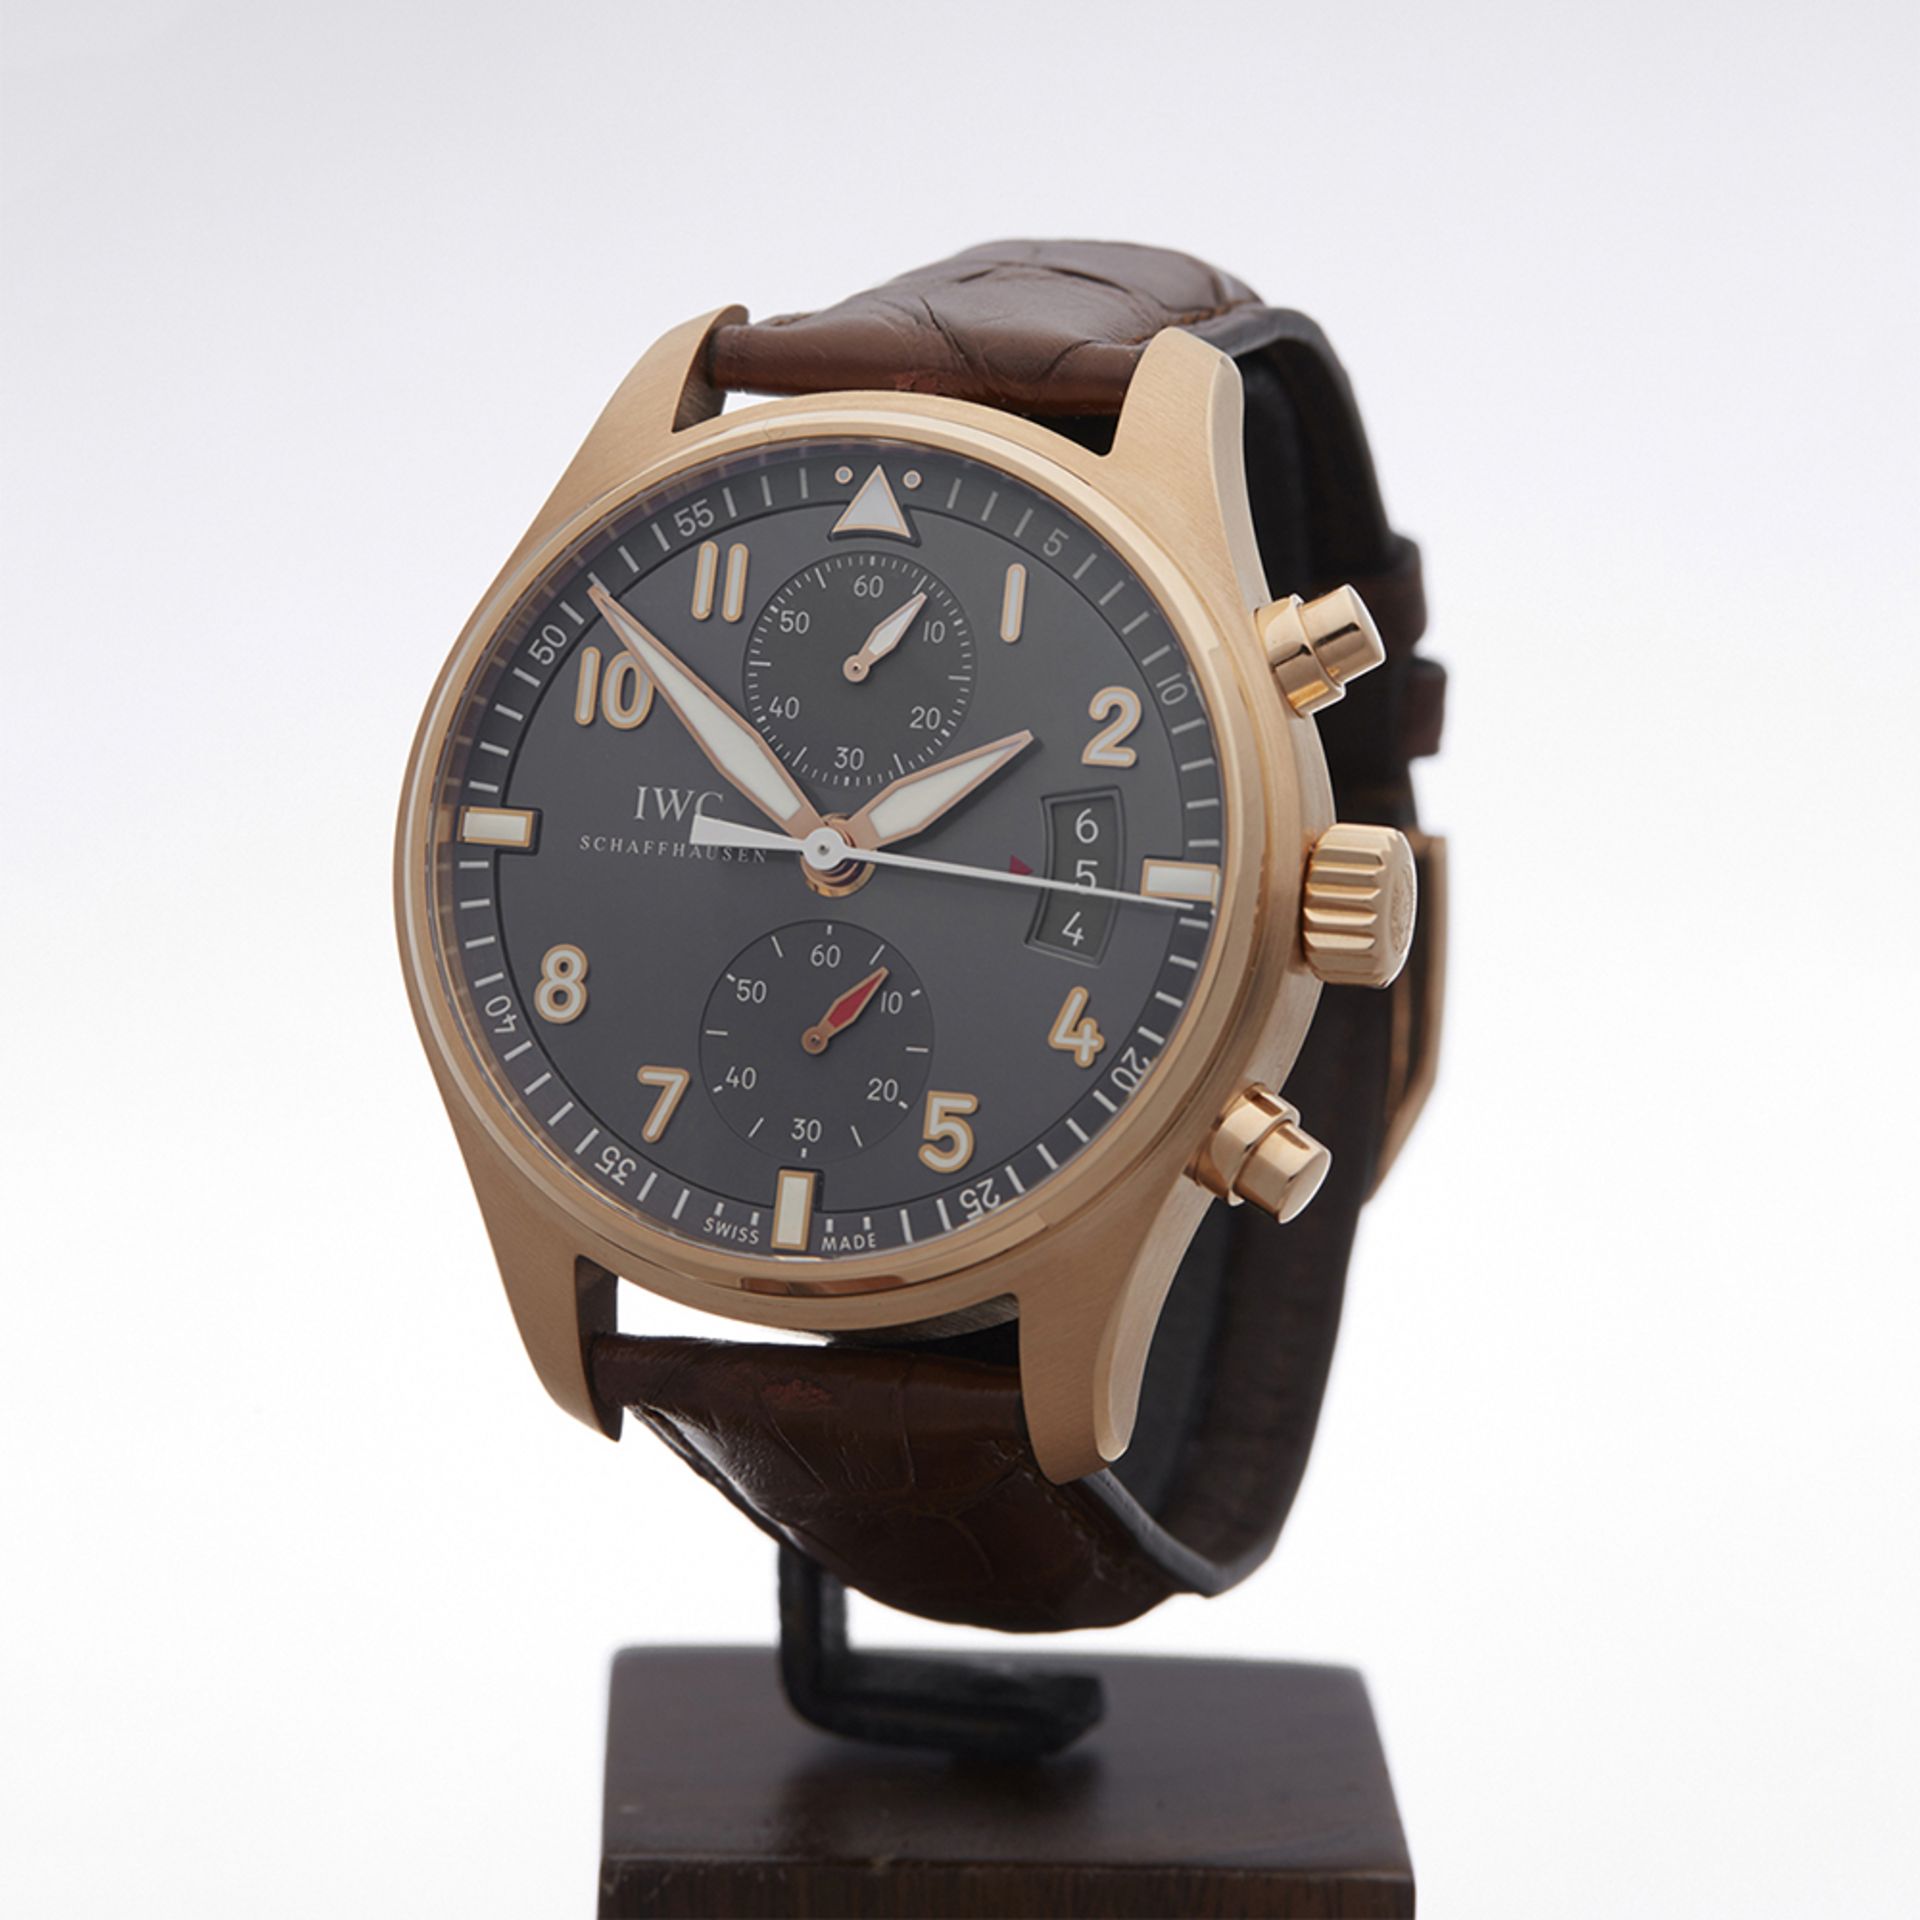 IWC, Pilot's Chronograph Spitfire 43mm 18k Rose Gold IW387803 - Image 3 of 9